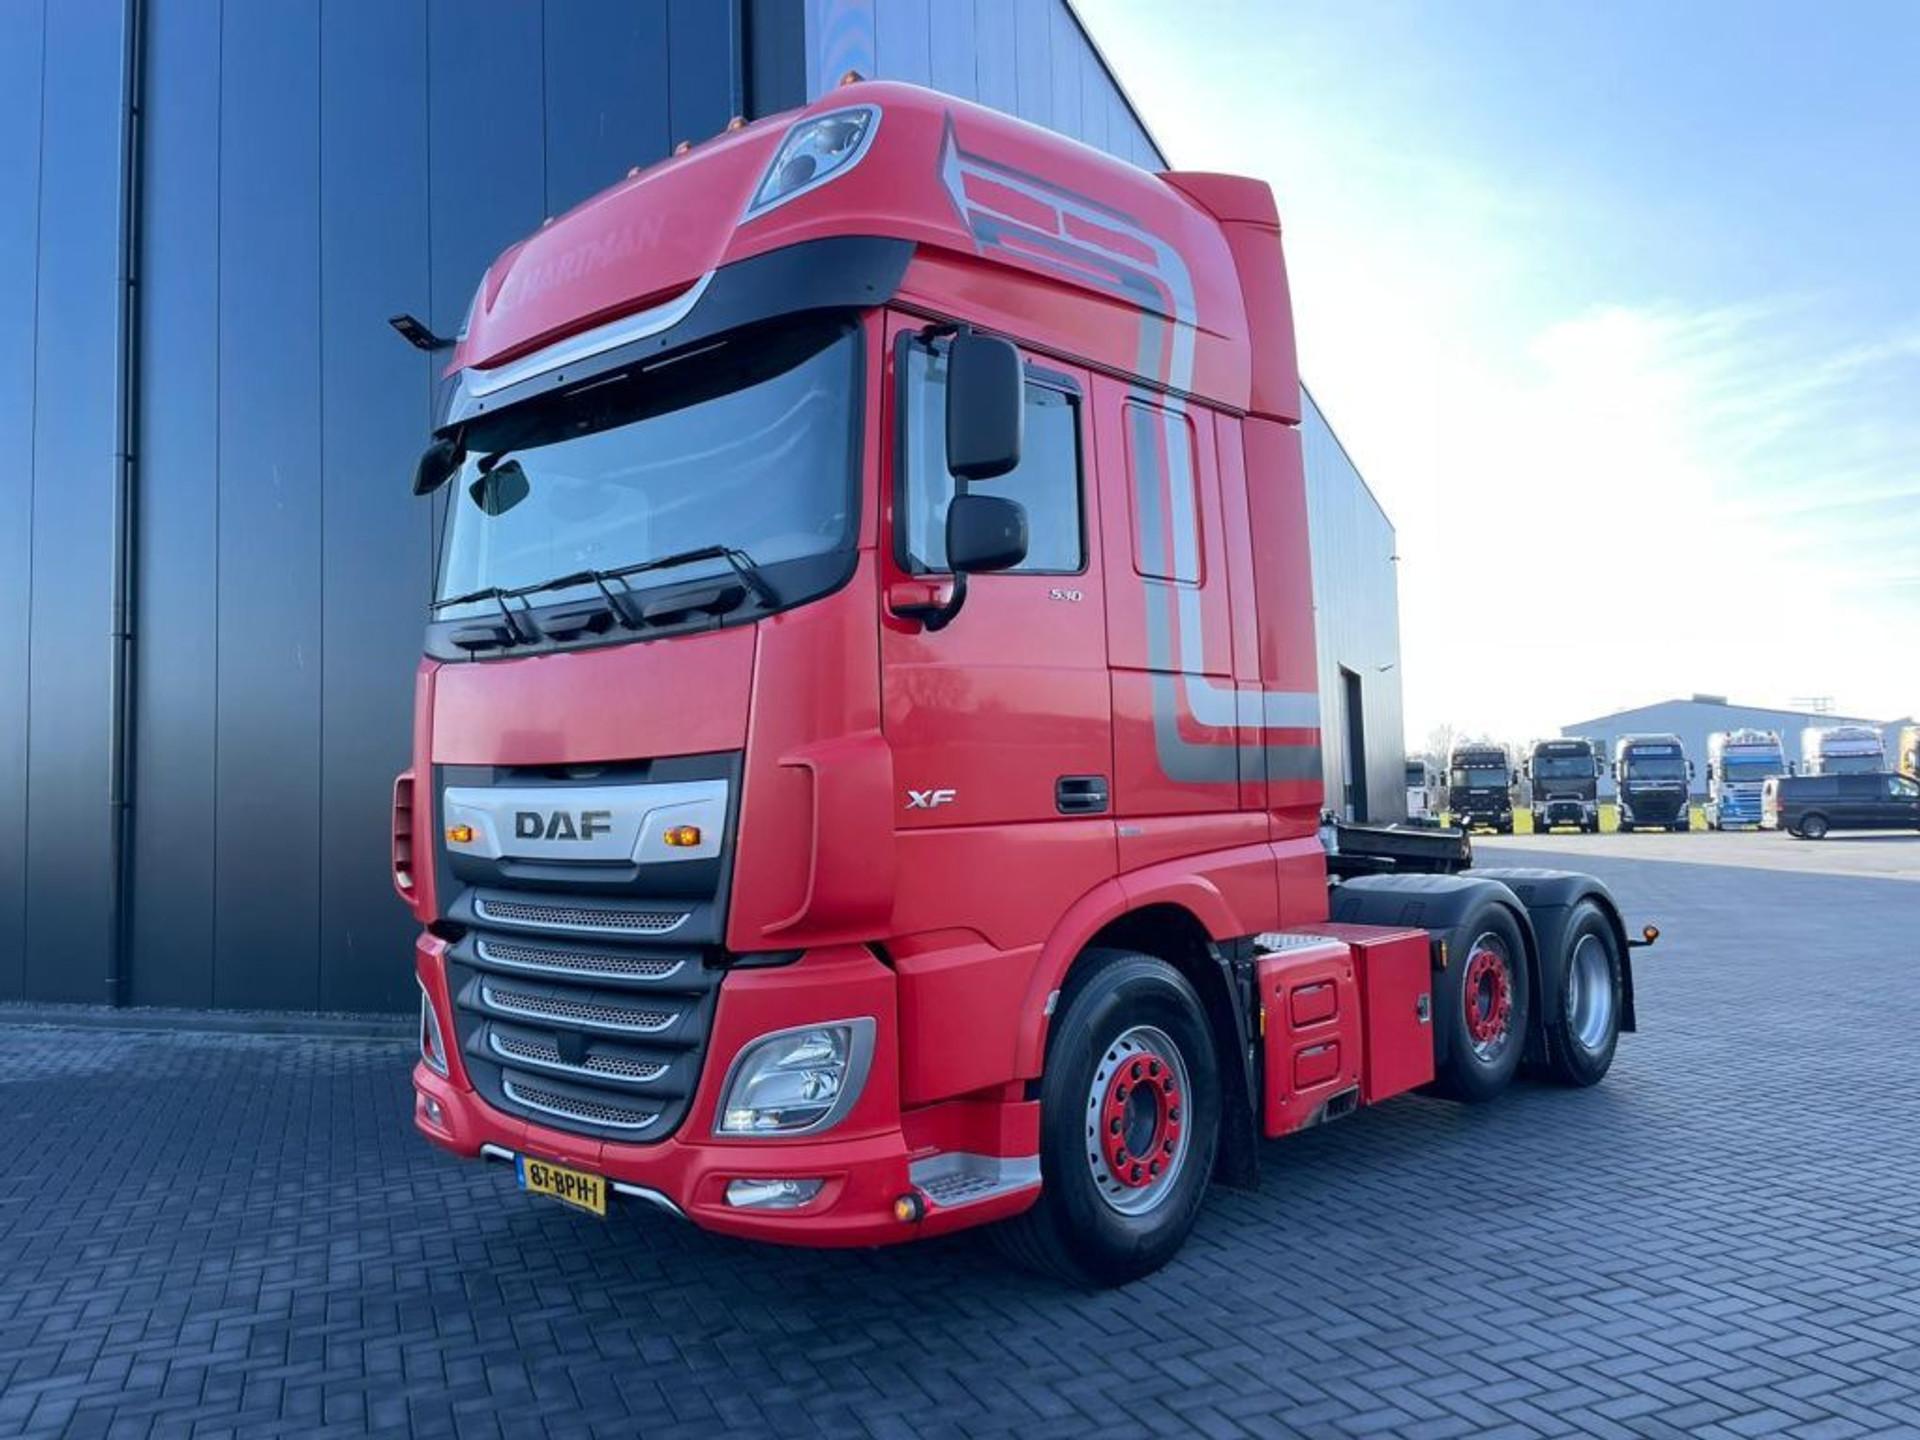 Foto 1 van DAF XF 530 SSC, 6X2/4, LEATHER SEATS, NL TRUCK, PERFECT CONDITION.